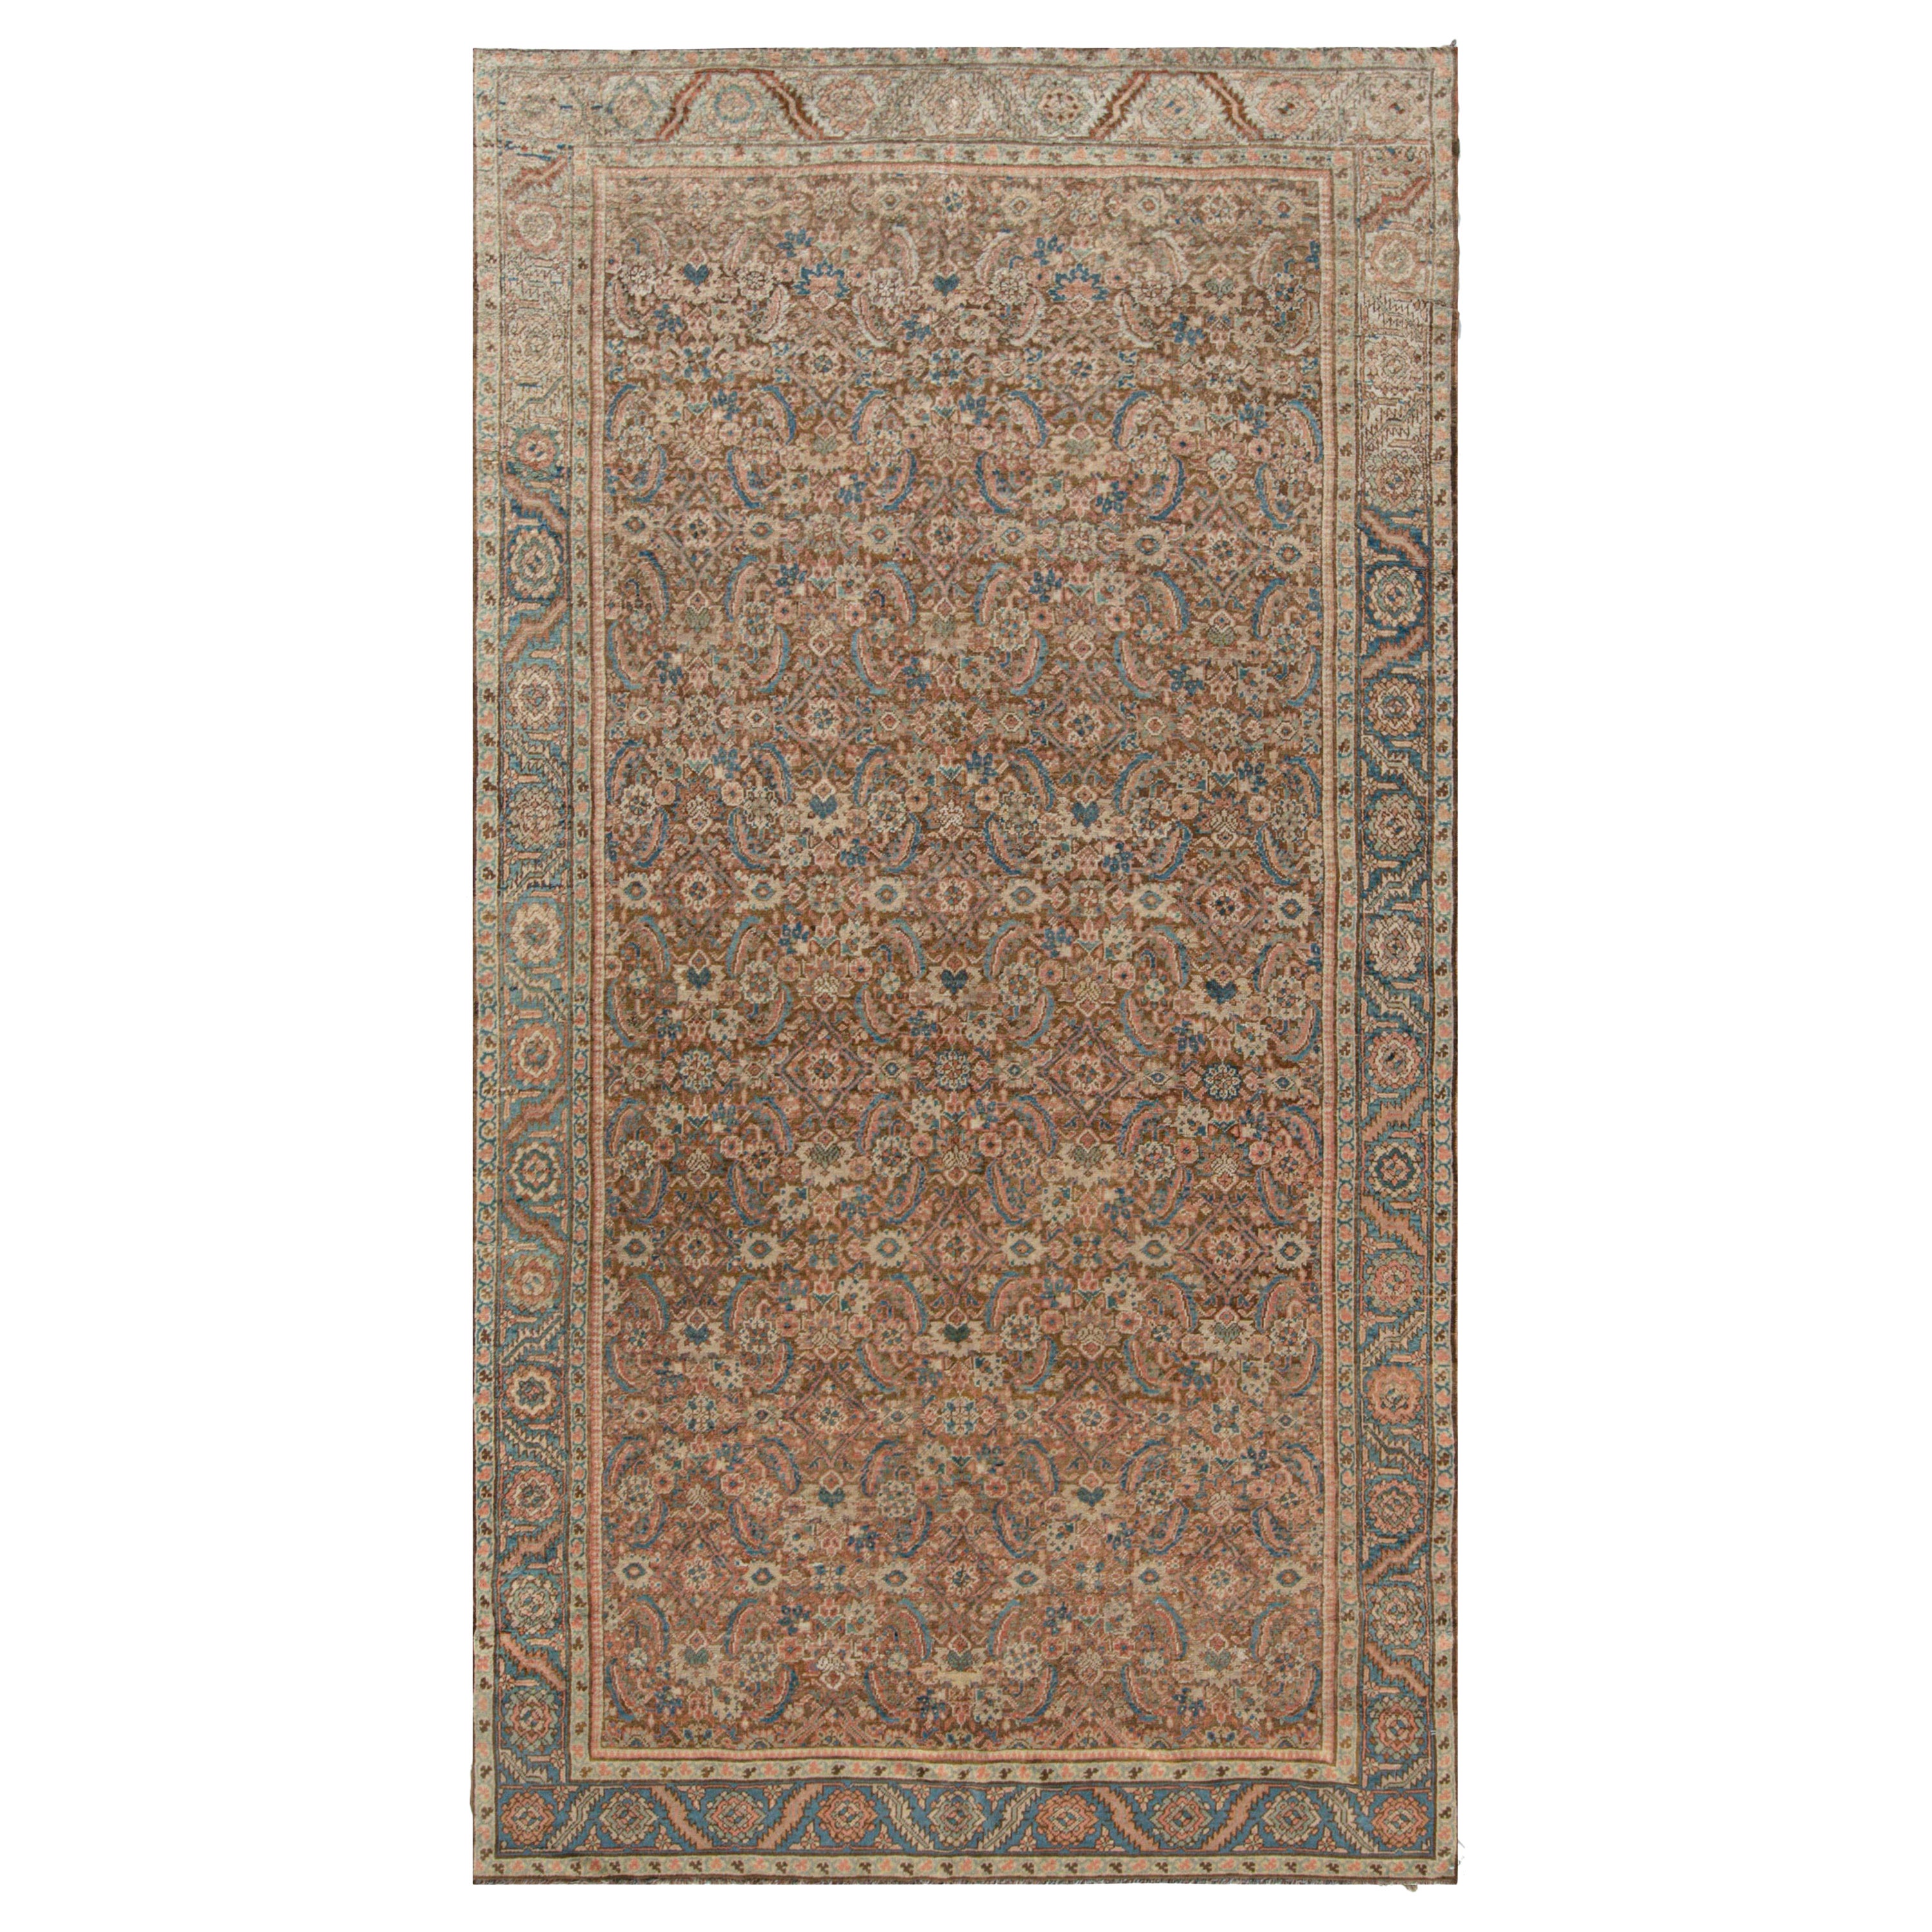 Authentic Early 20th Century Persian Feraghan Rug For Sale